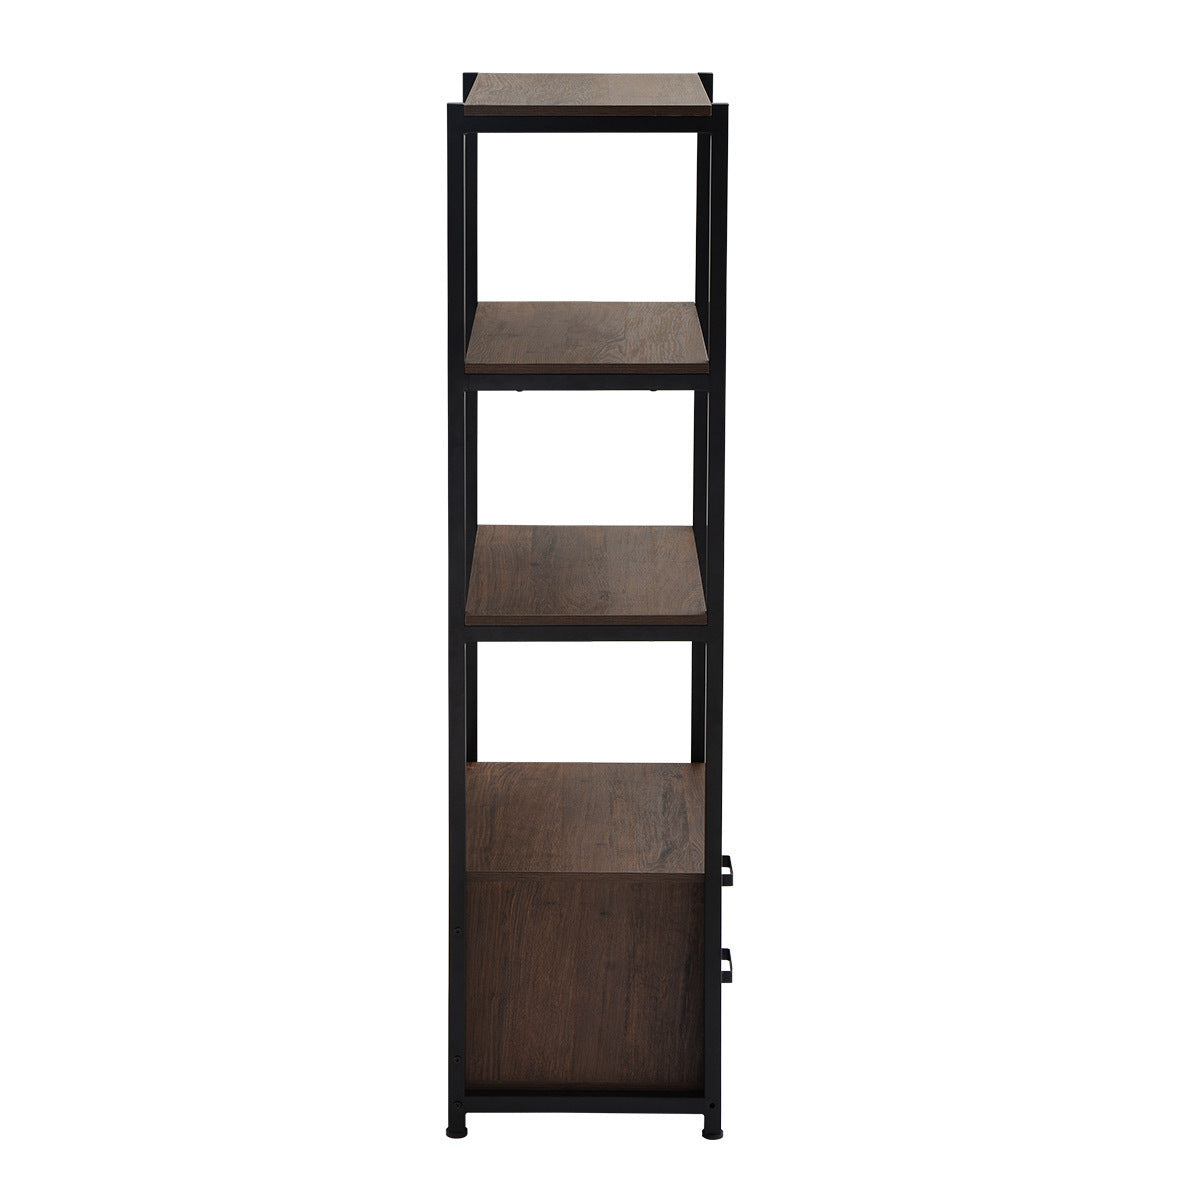 4-Tier Bookshelf Industrial Bookcase with 4 Open Storage Shelves and Two Drawers